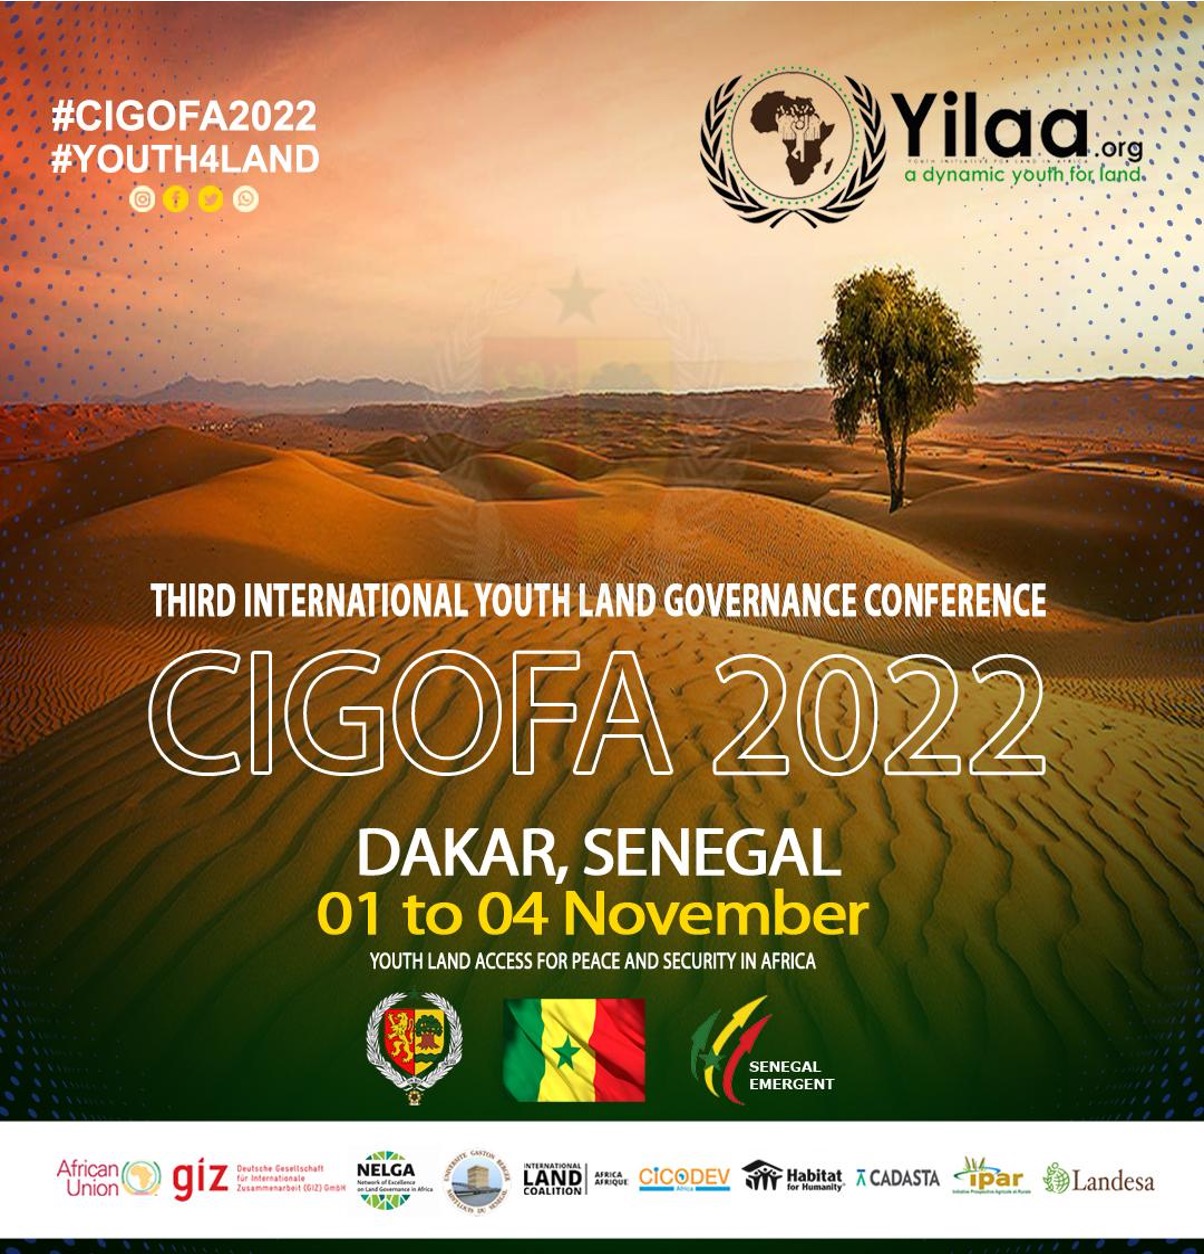 Third international Youth Land Governance Conference in Africa (CIGOFA 3)